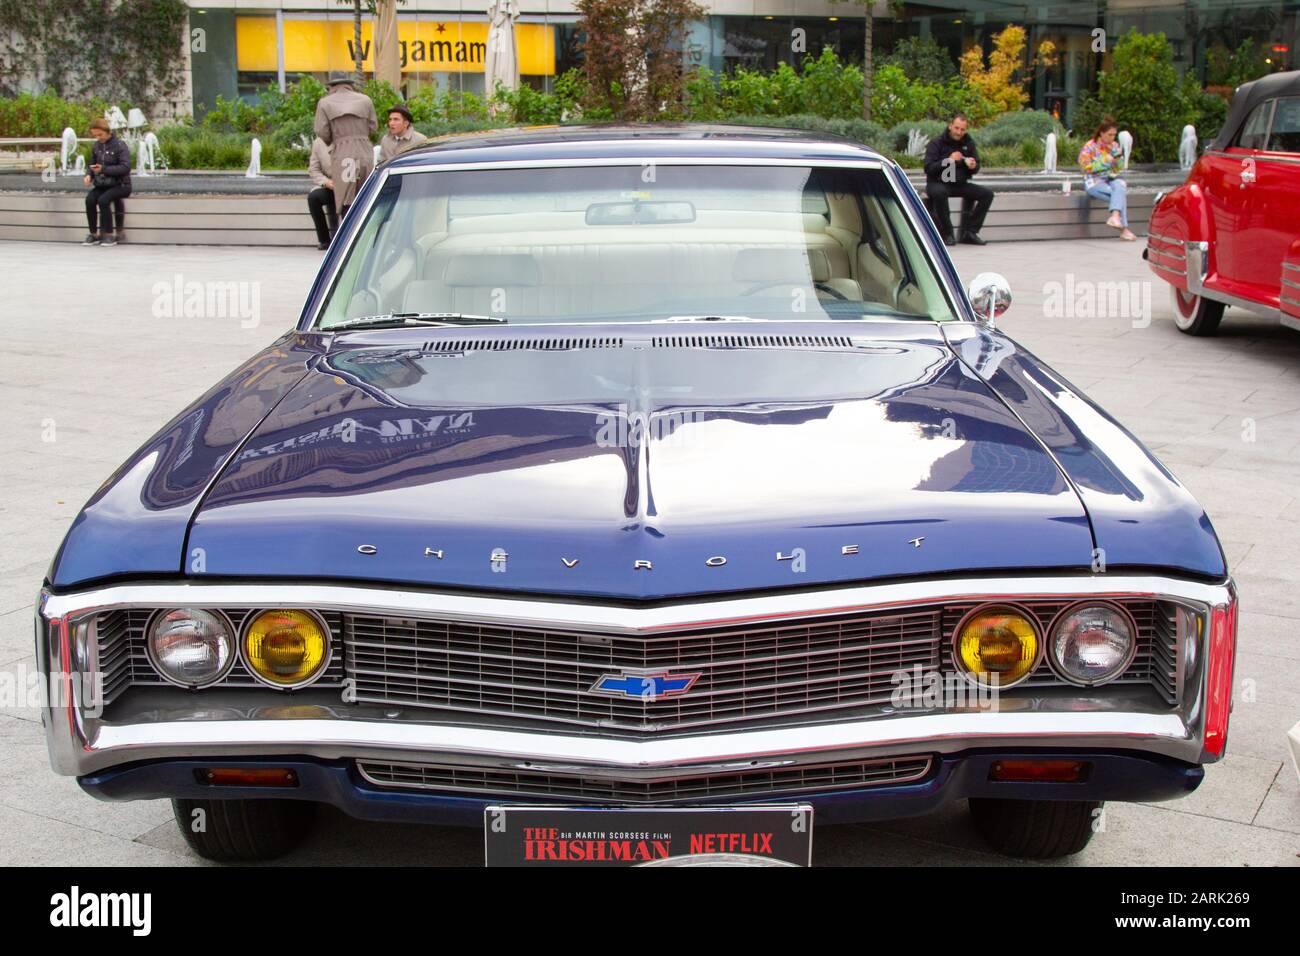 Front view of navy blue Chevrolet Impala Stock Photo - Alamy